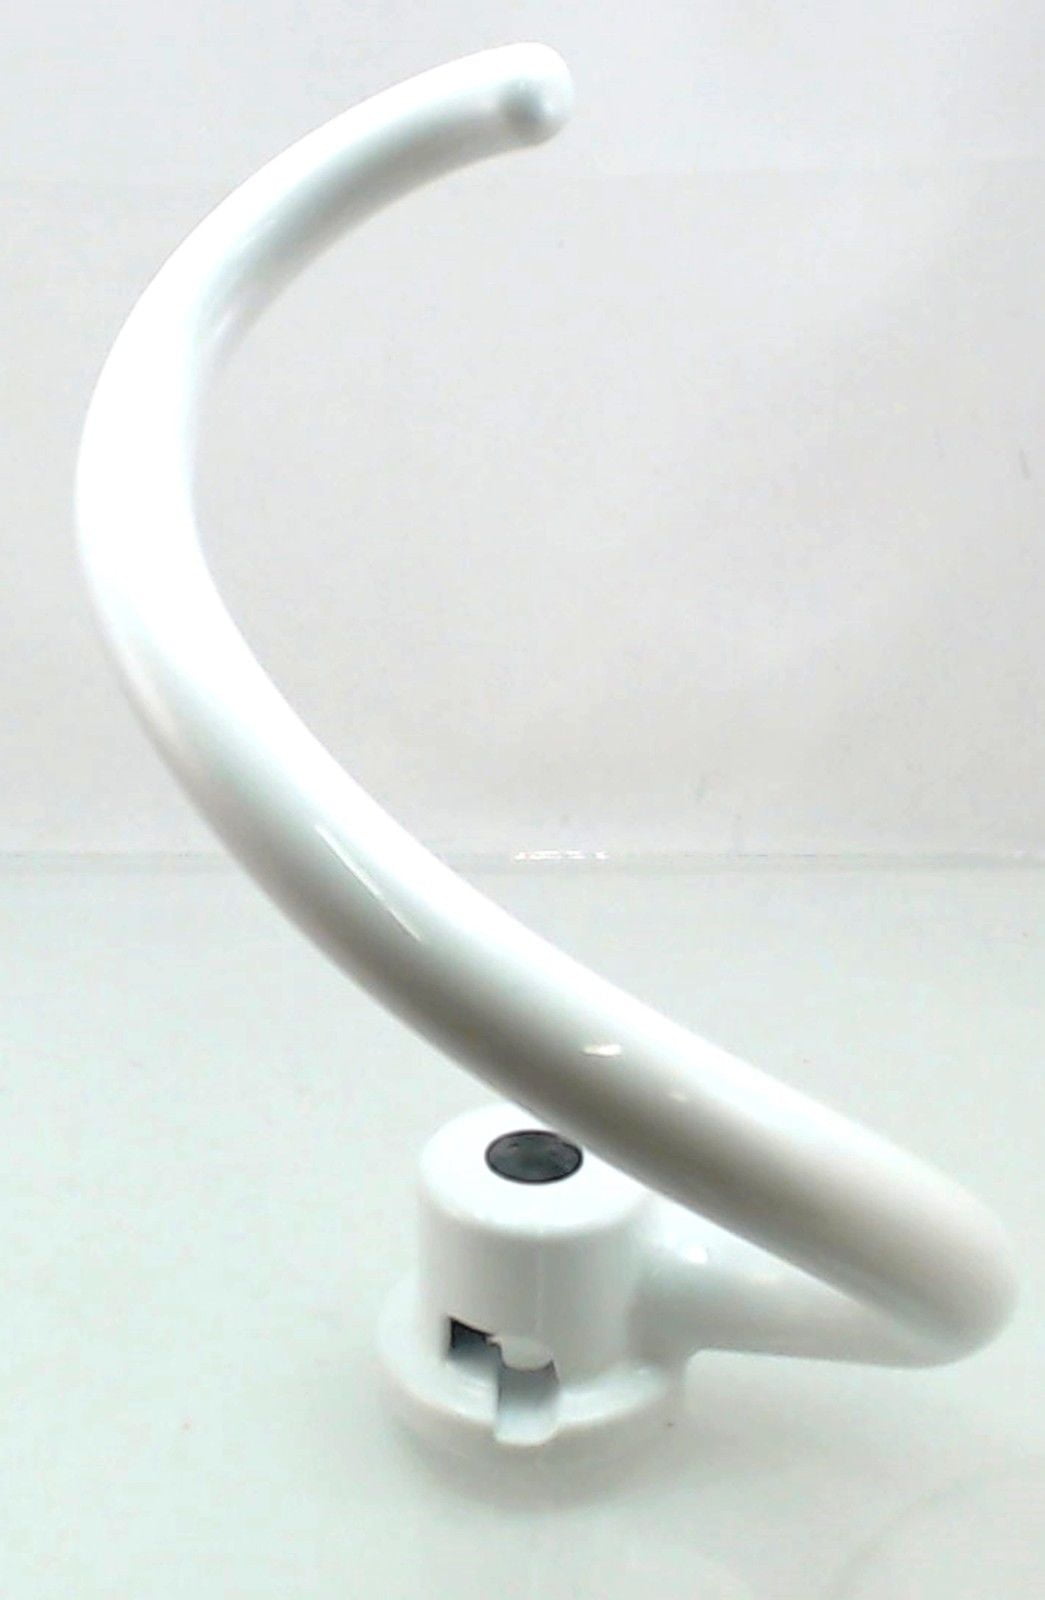 W10674621 Mixer K5ADH Dough Hook Replacement for Whirlpool / KitchenAid >  Speedy Appliance Parts